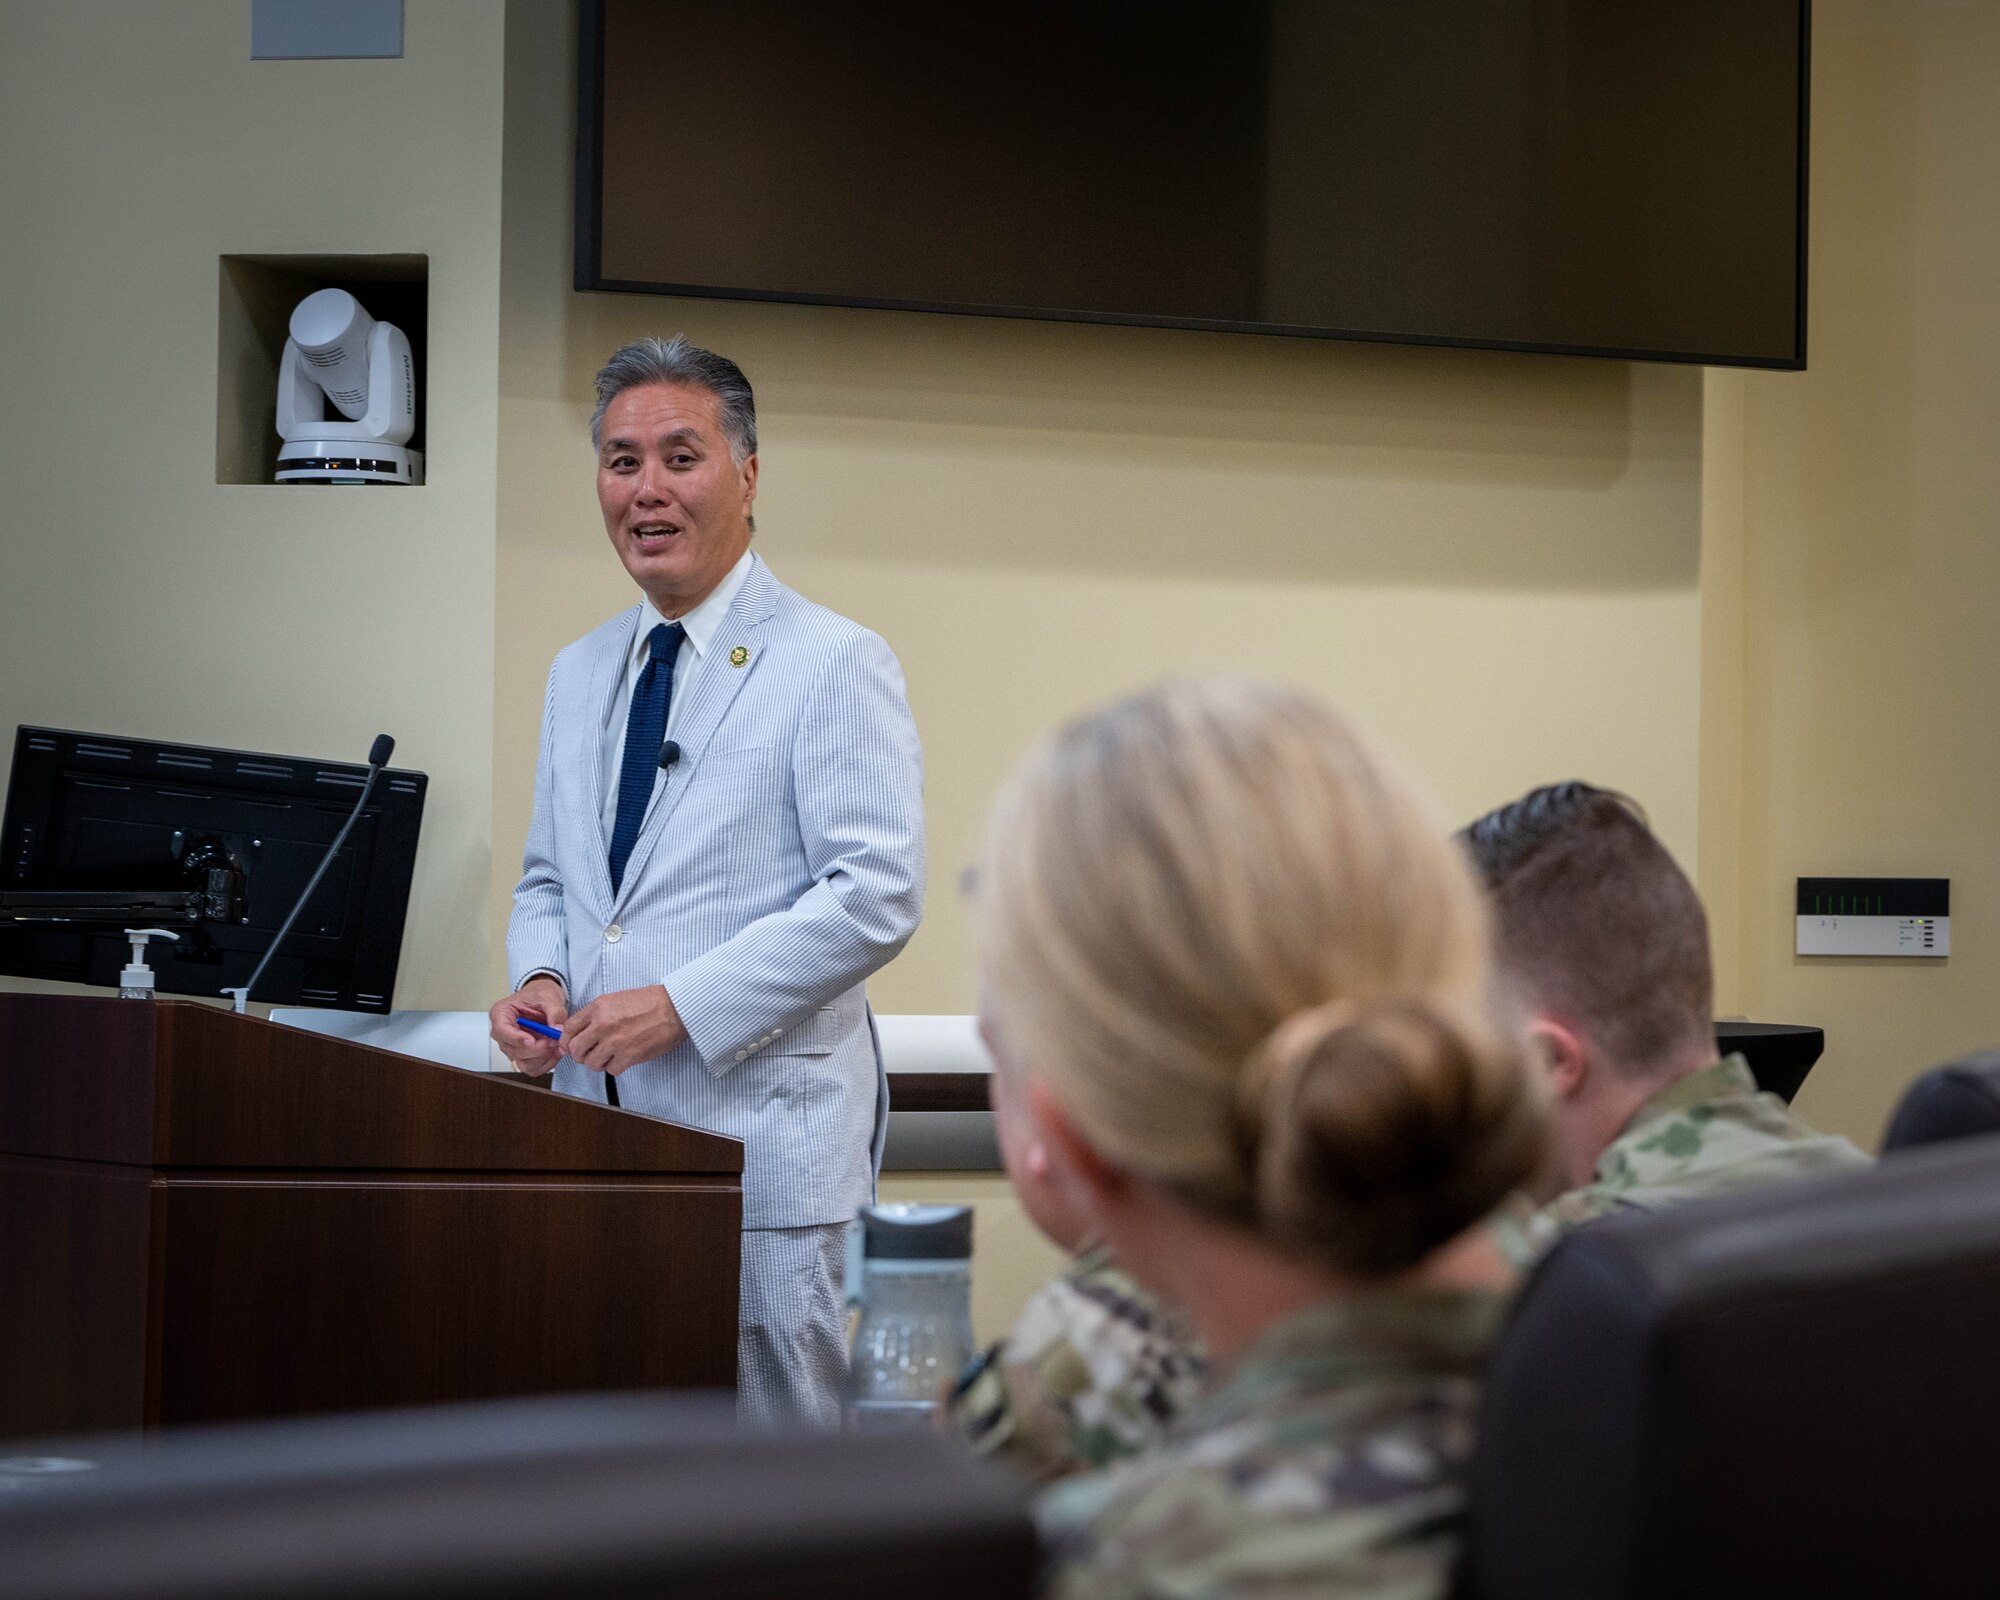 Rep. Mark Takano, a representative of California’s 39th Congressional District, speaks to Airmen about the importance of diversity, equity and inclusion at Joint Base Andrews, Maryland, June 20, 2023. The panel discussion was part of a series of events hosted by the Air National Guard Readiness Center’s Diversity and Inclusion Office, recognizing June as Pride Month, which honors LGBTQ+ service members and personnel. This year’s theme was Equality Without Exception.